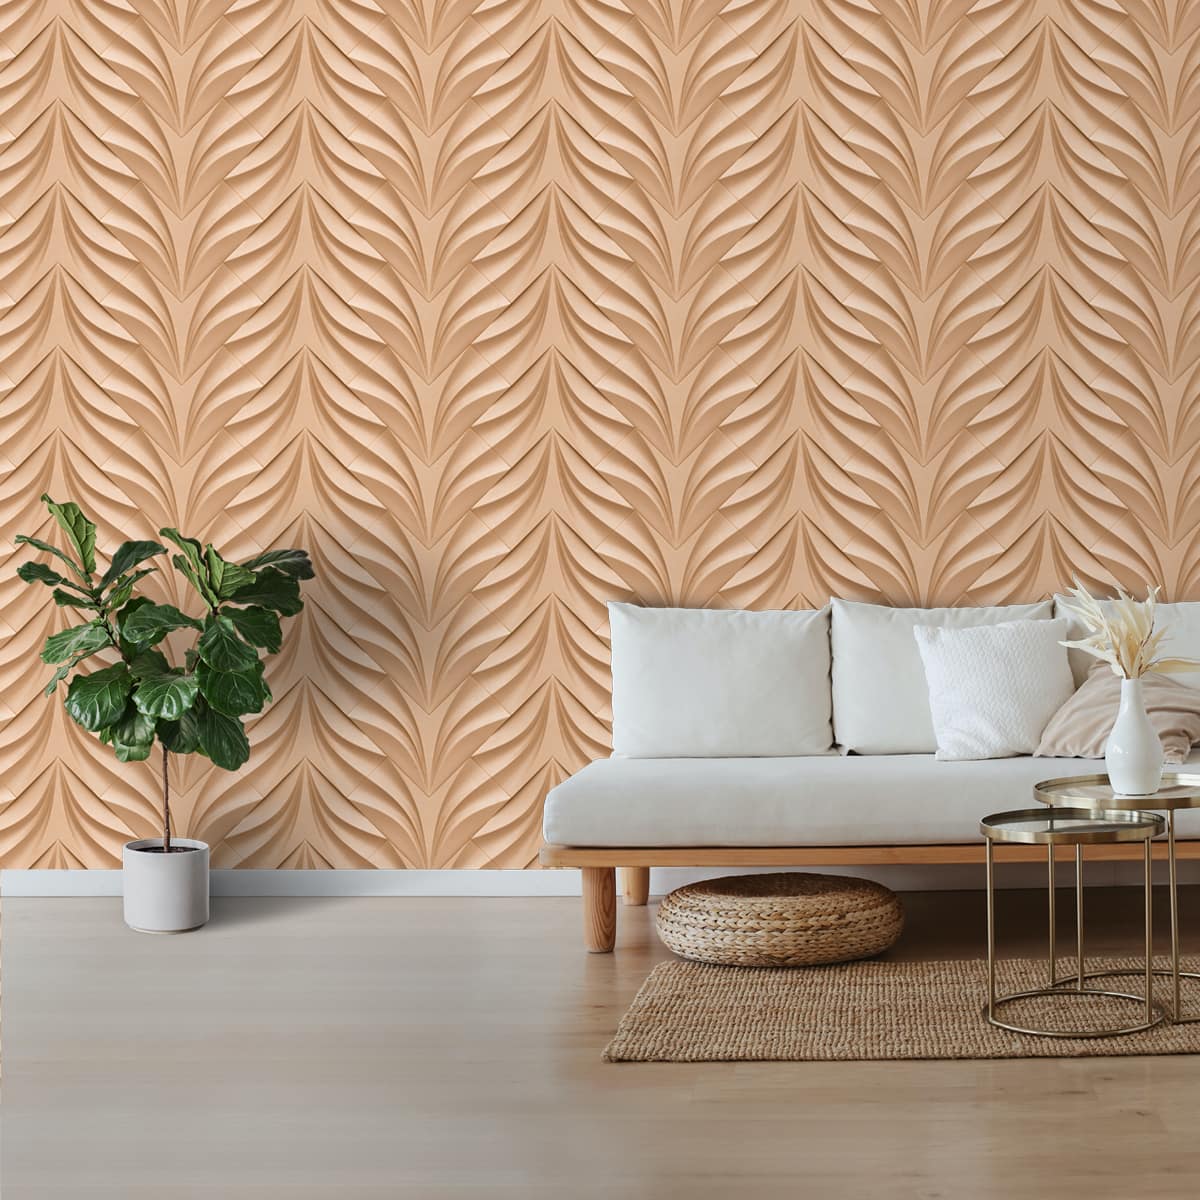 3D Wallpaper Design for Wallpapers for Room Walls